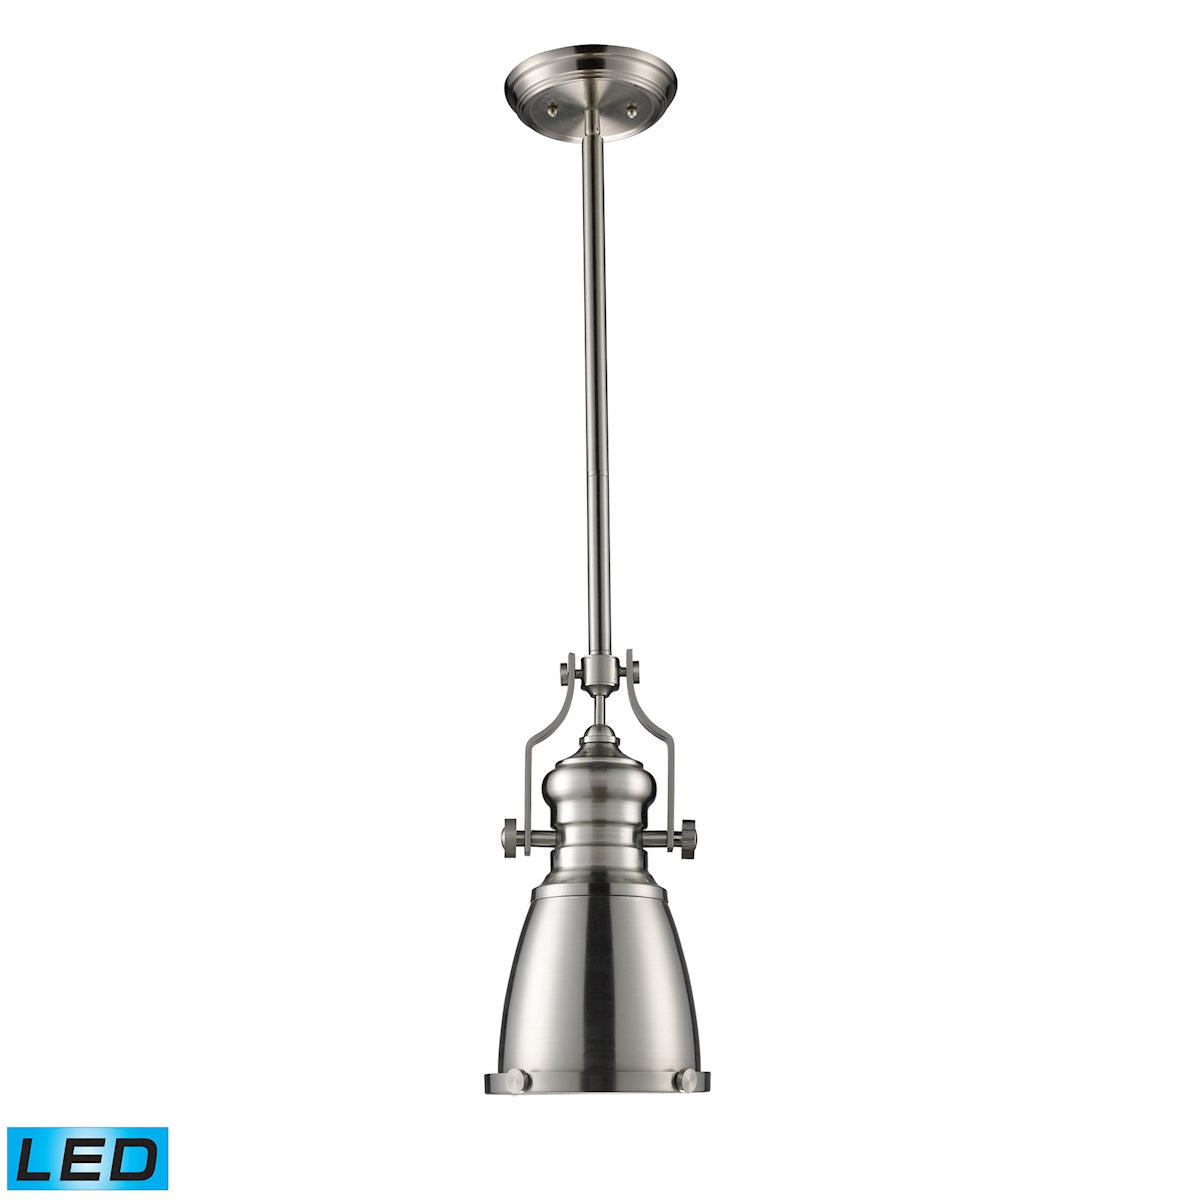 ELK Lighting 66119-1-LED Chadwick 1-Light Mini Pendant in Satin Nickel with Matching Shades - Includes LED Bulb